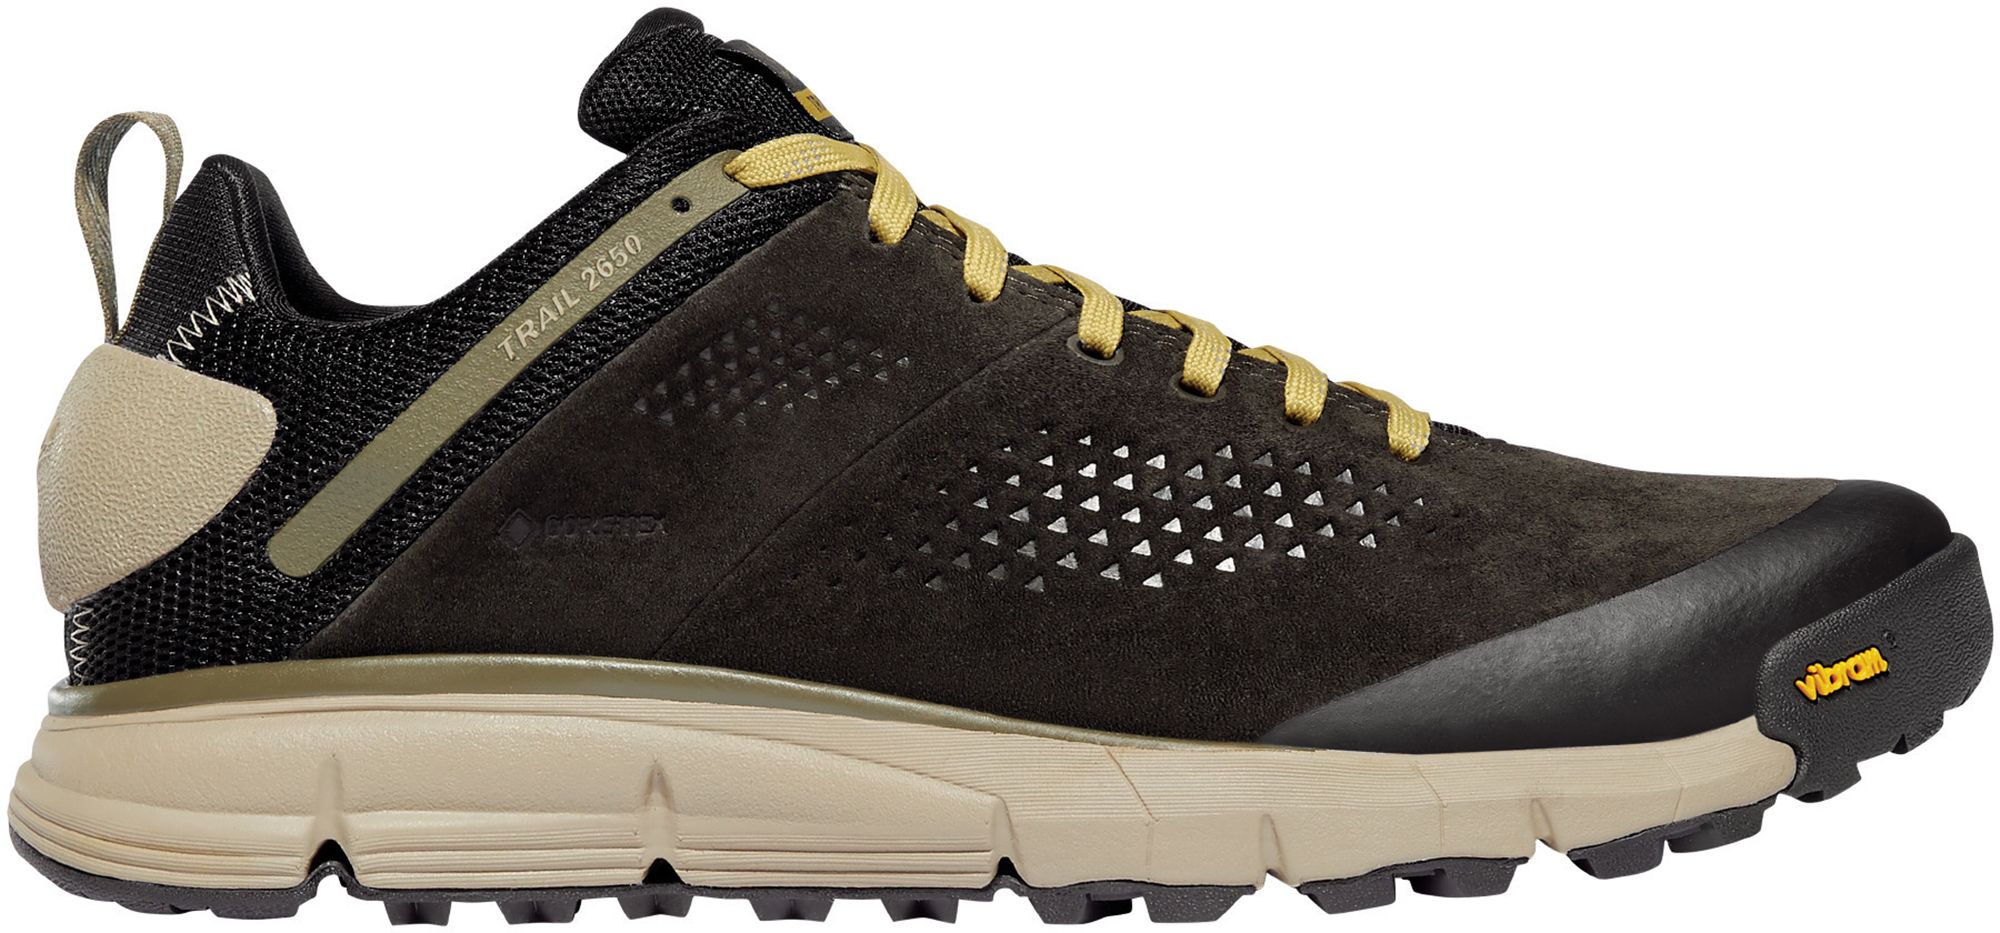 Photos - Trekking Shoes Danner Men's Trail 2650 GTX Hiking Shoes, Size 11, Black Olive/Yellow | Fa 